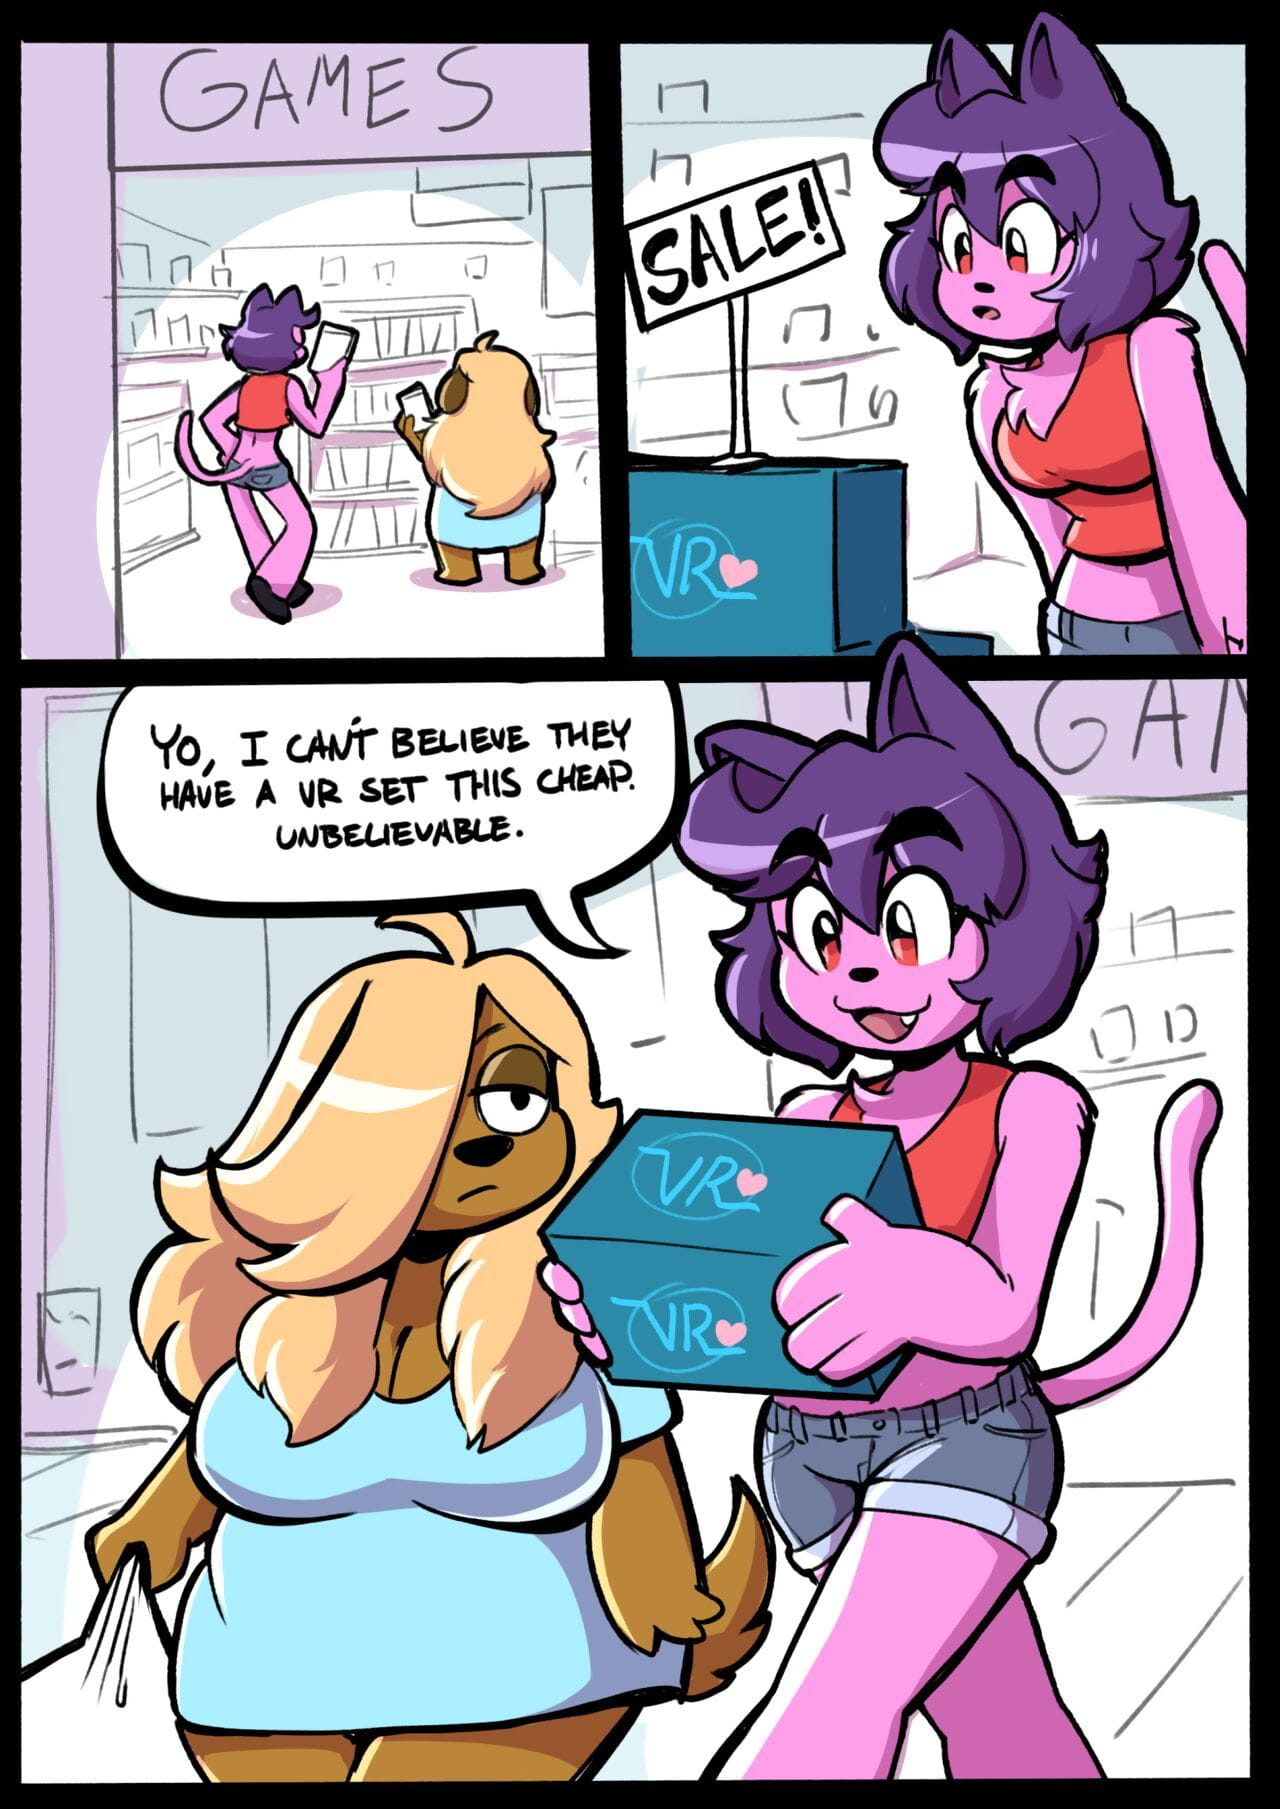 Penny: Hardcore Gaming page 1